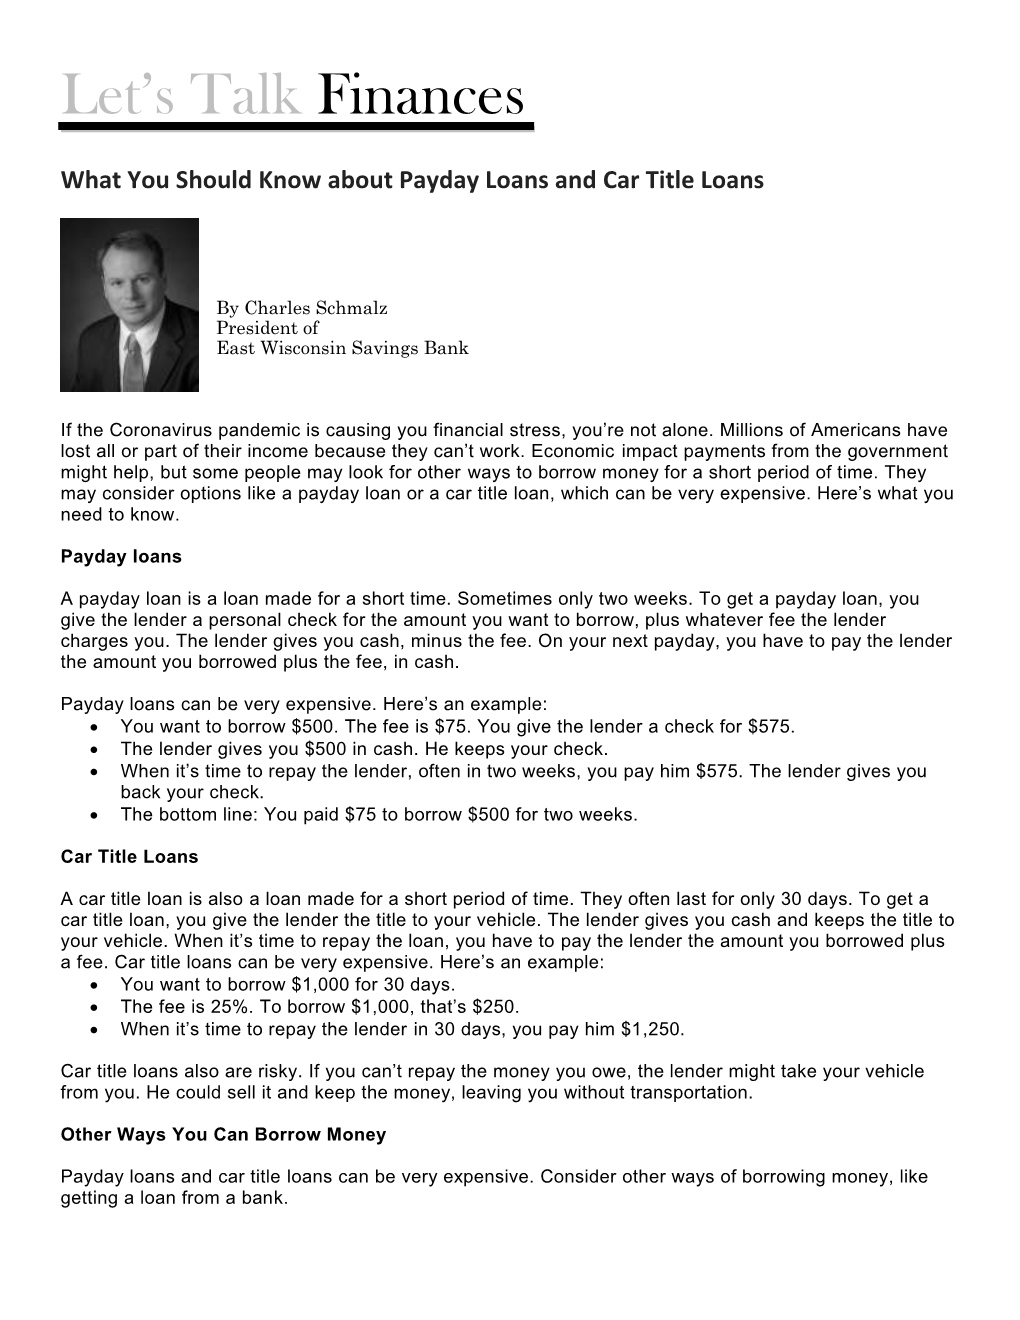 What You Should Know About Payday Loans and Car Title Loans